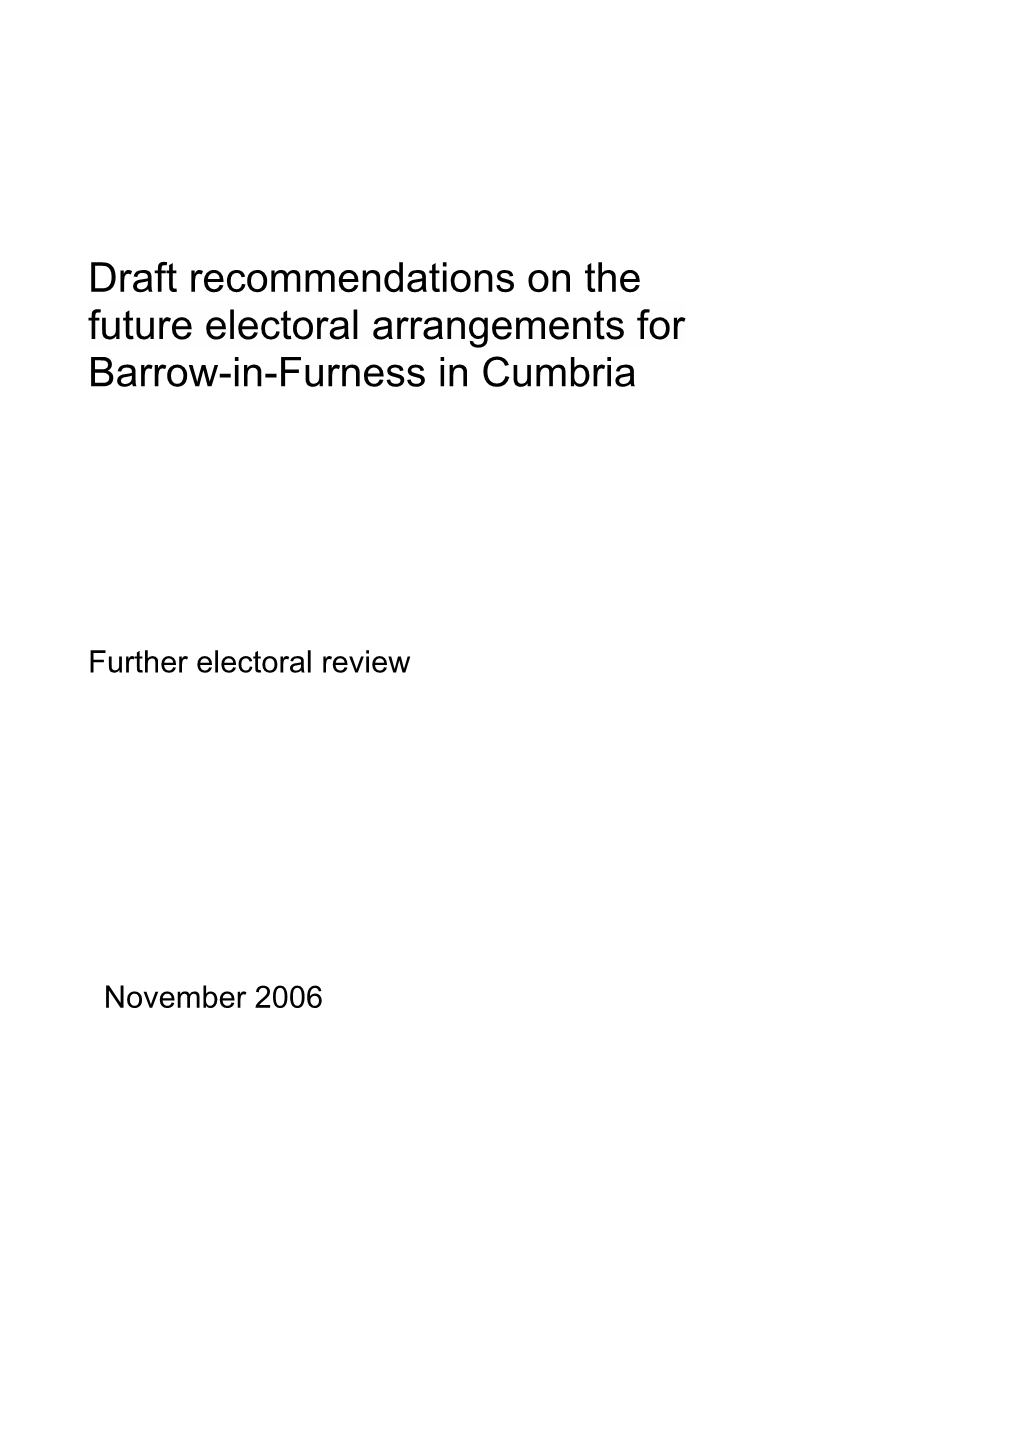 Draft Recommendations on the Future Electoral Arrangements for Barrow-In-Furness in Cumbria